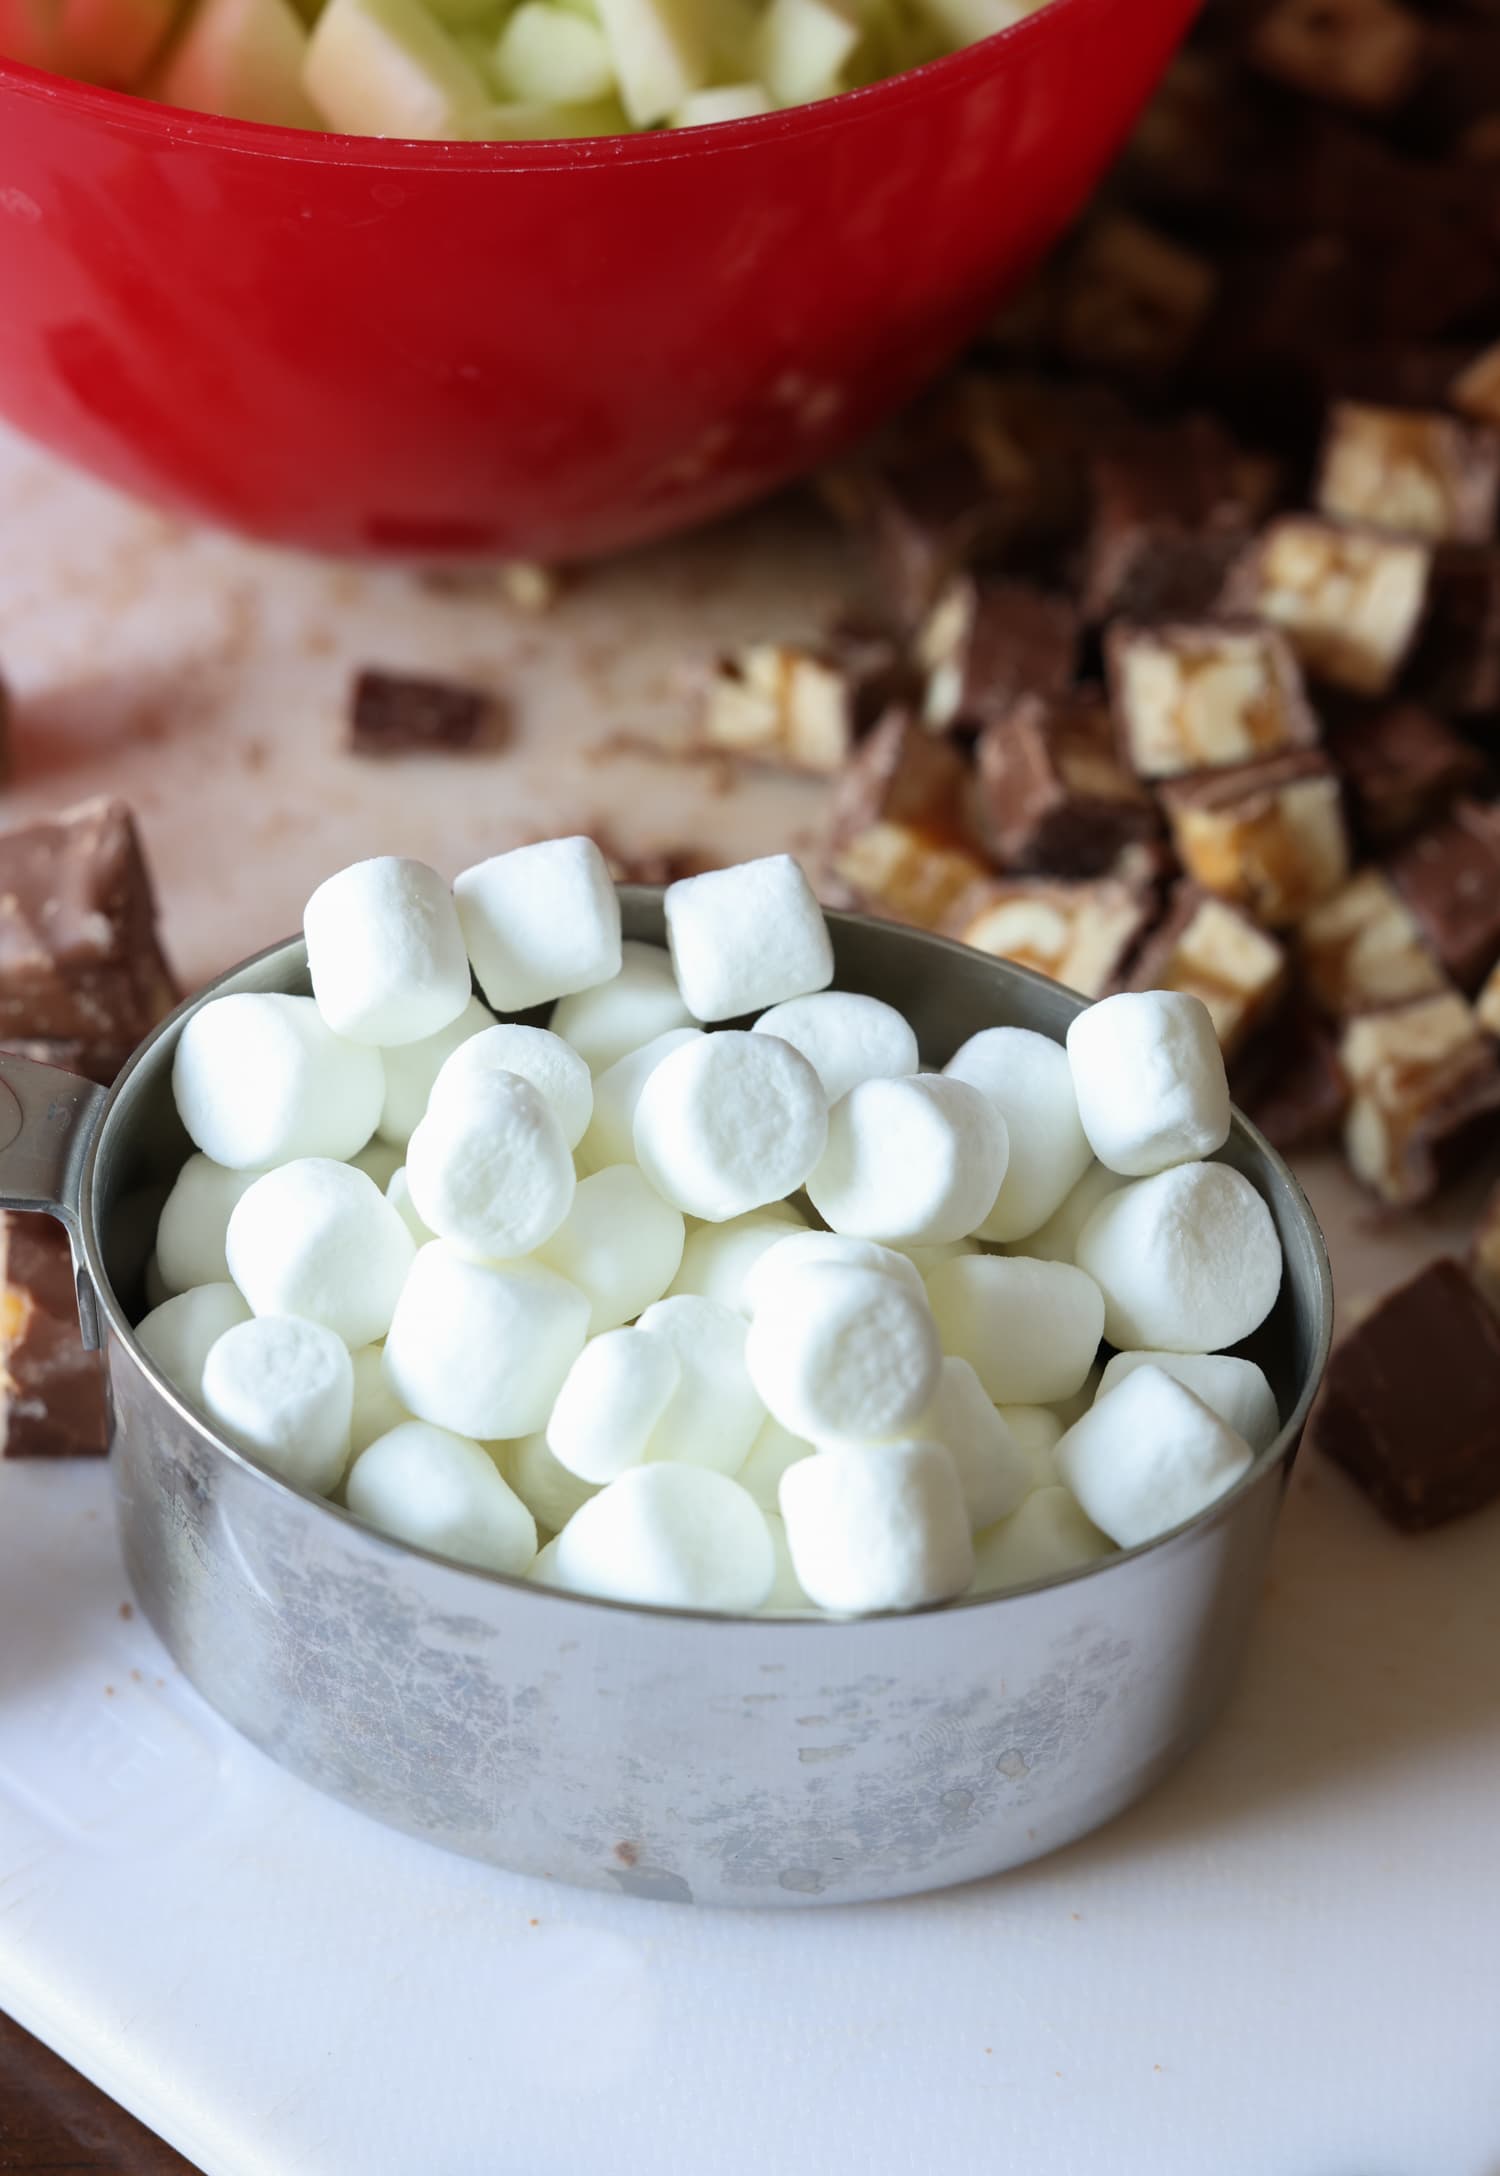 Mini marshmallows in a measuring cup and Snickers bars carved on a cutting board